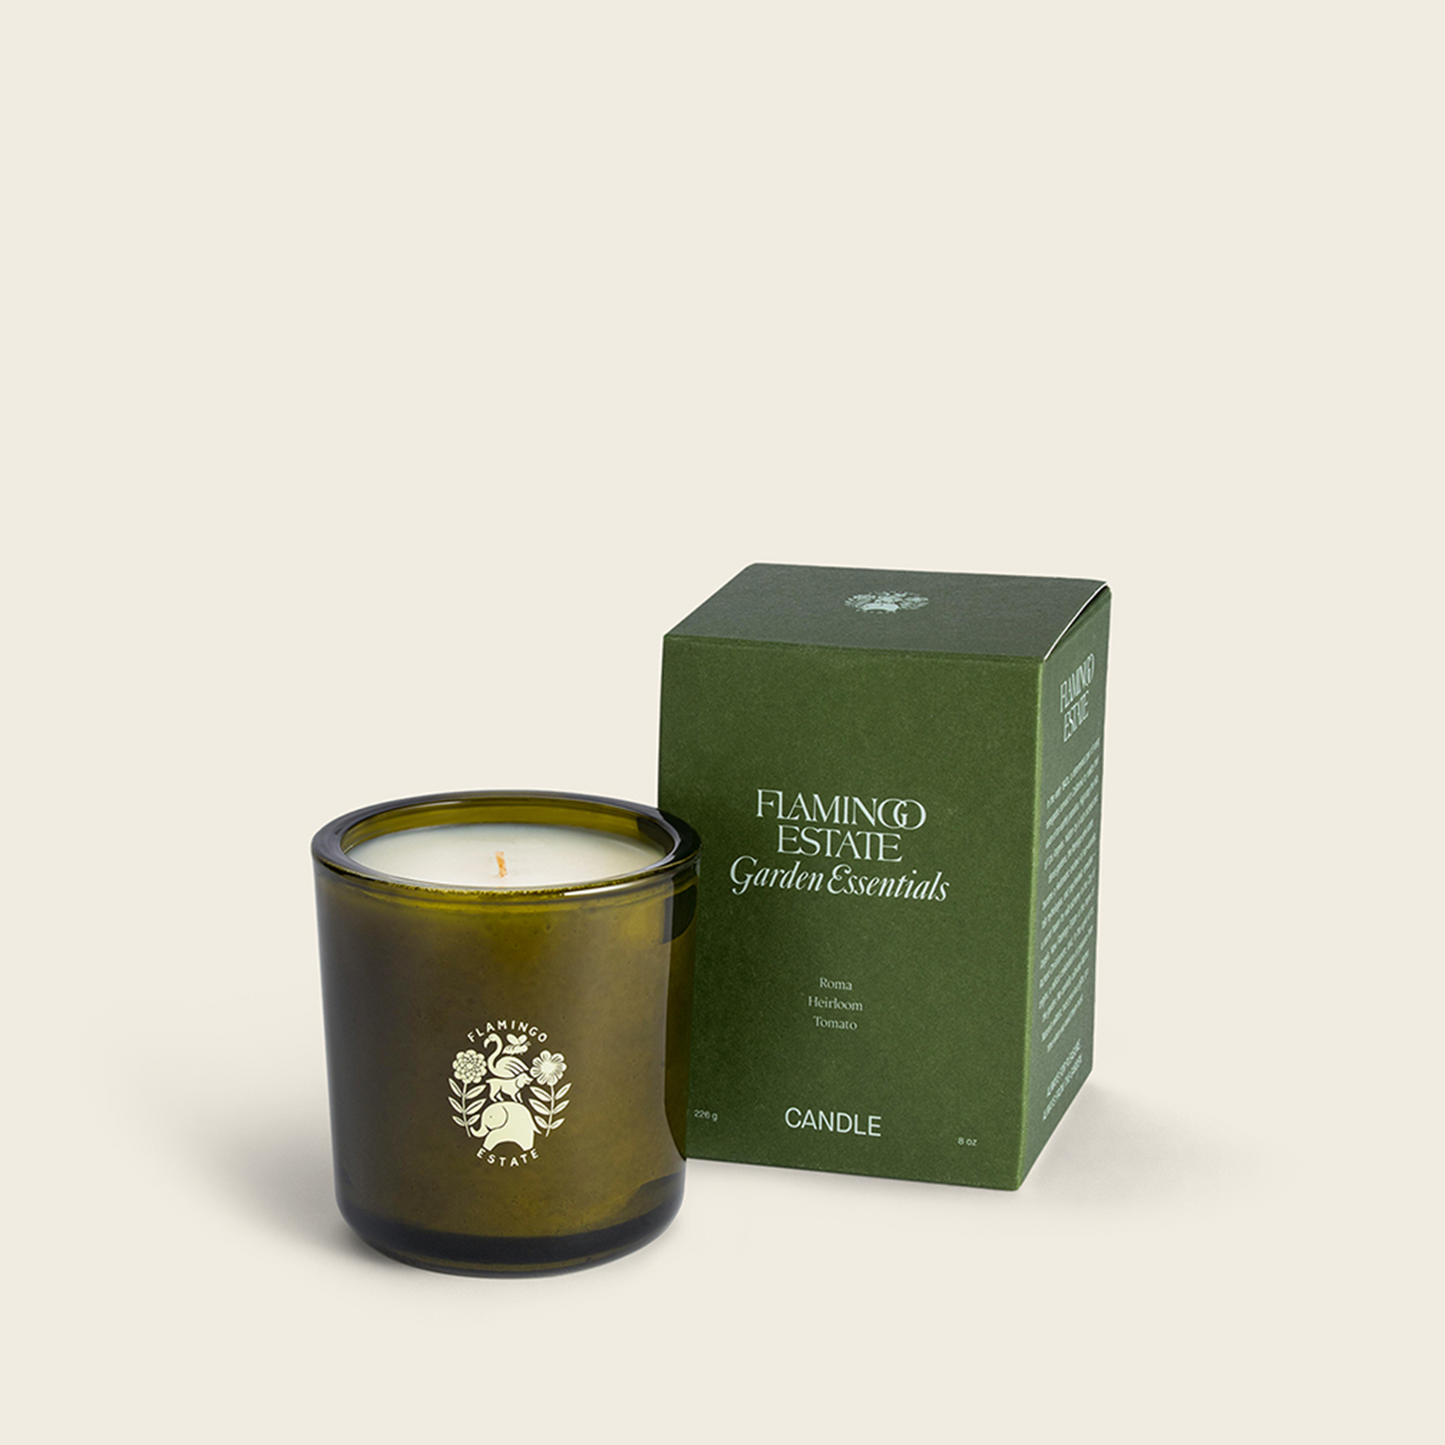 Tuscan Rosemary Candle